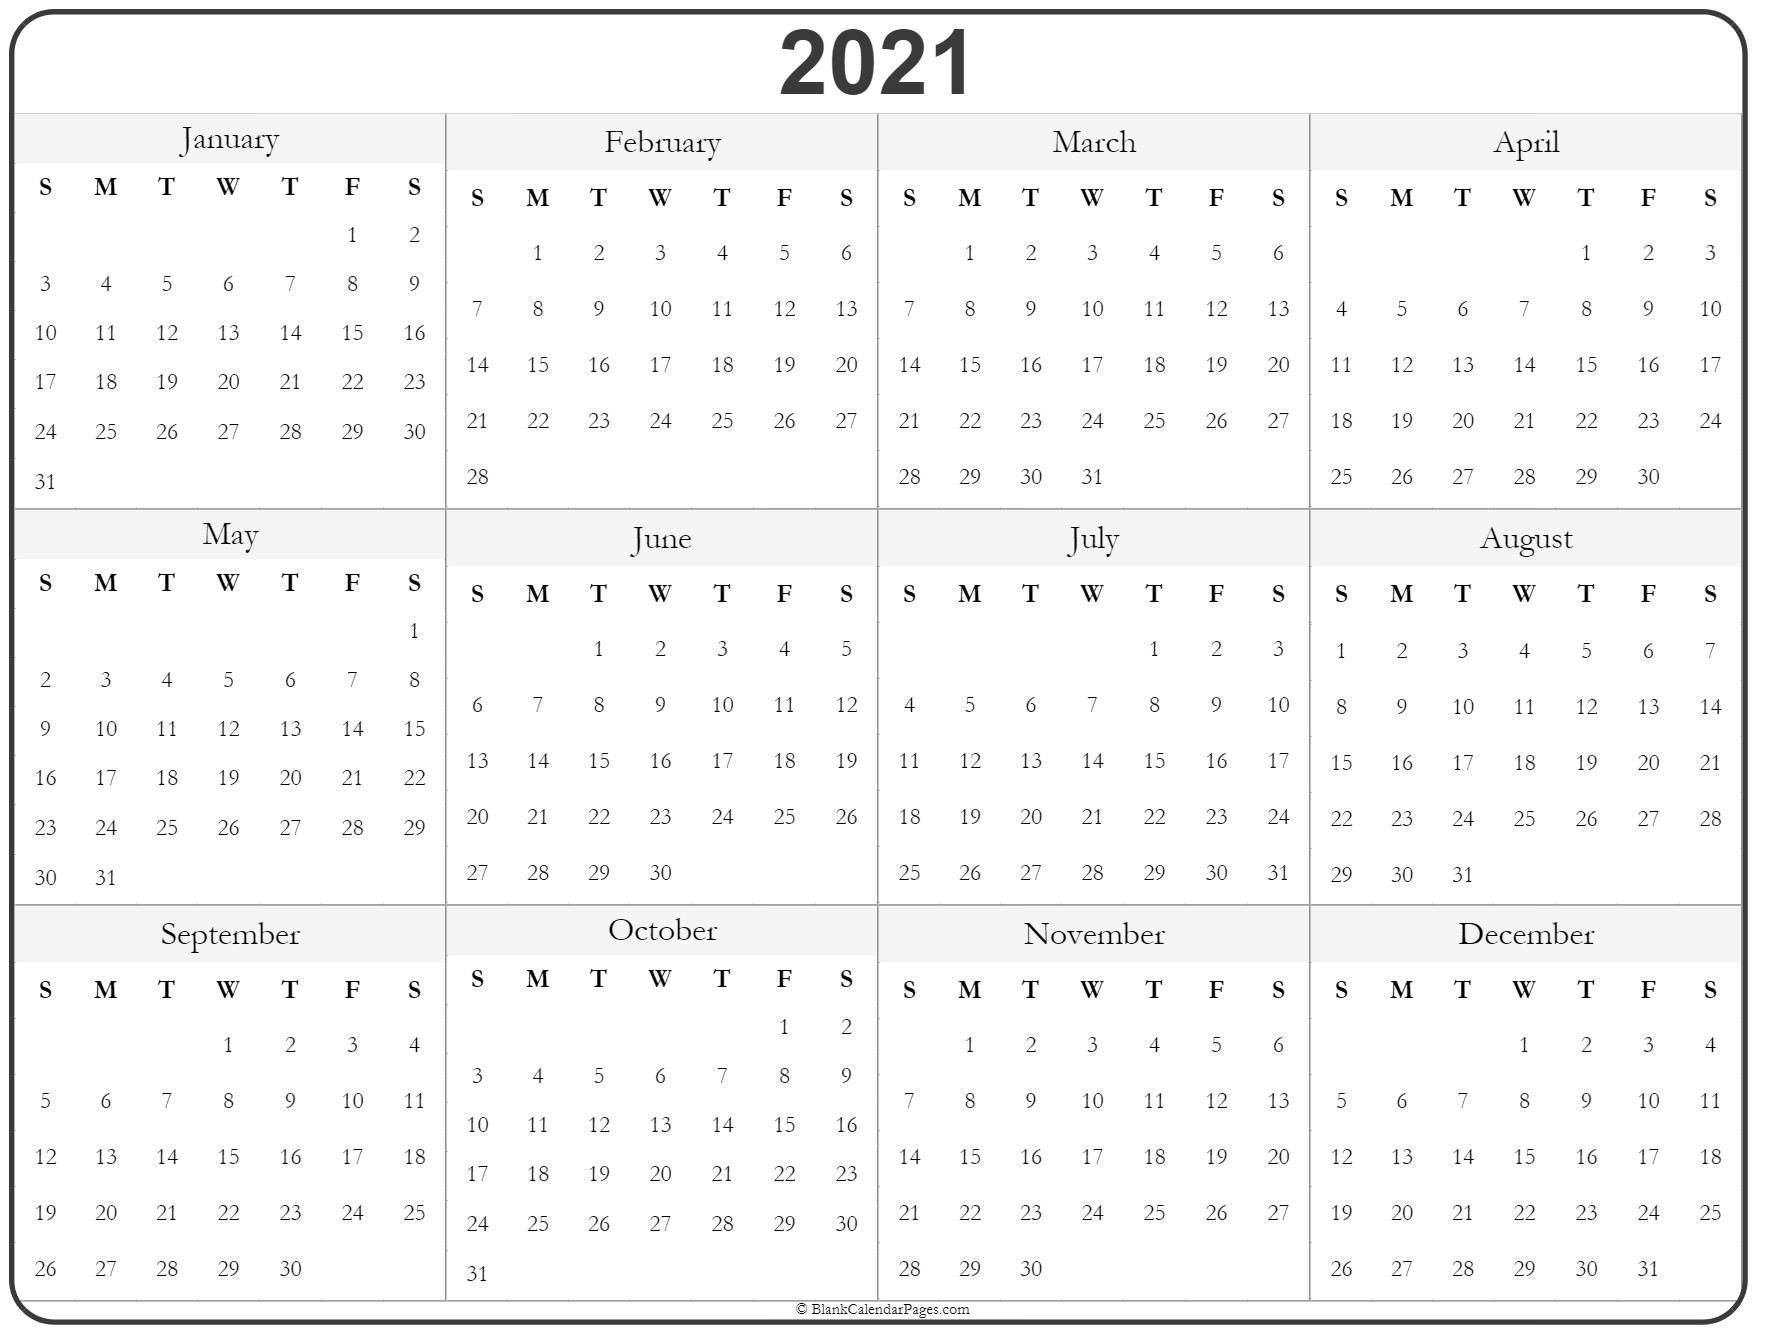 20+ Yearly Calendar 2021 Blank - Free Download Printable